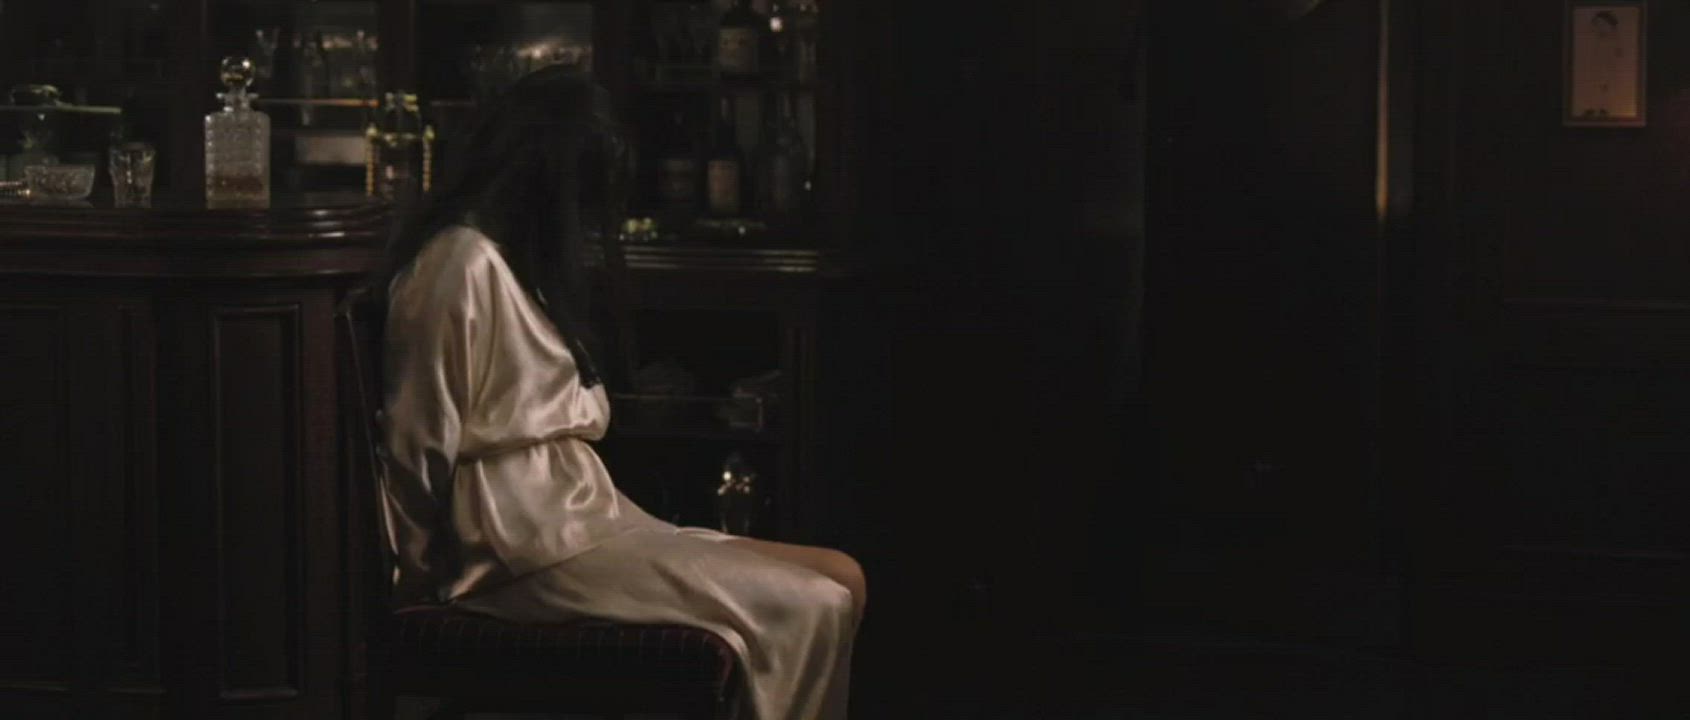 Tied up Gong Li refuses to give in (Hannibal Rising, 2007)